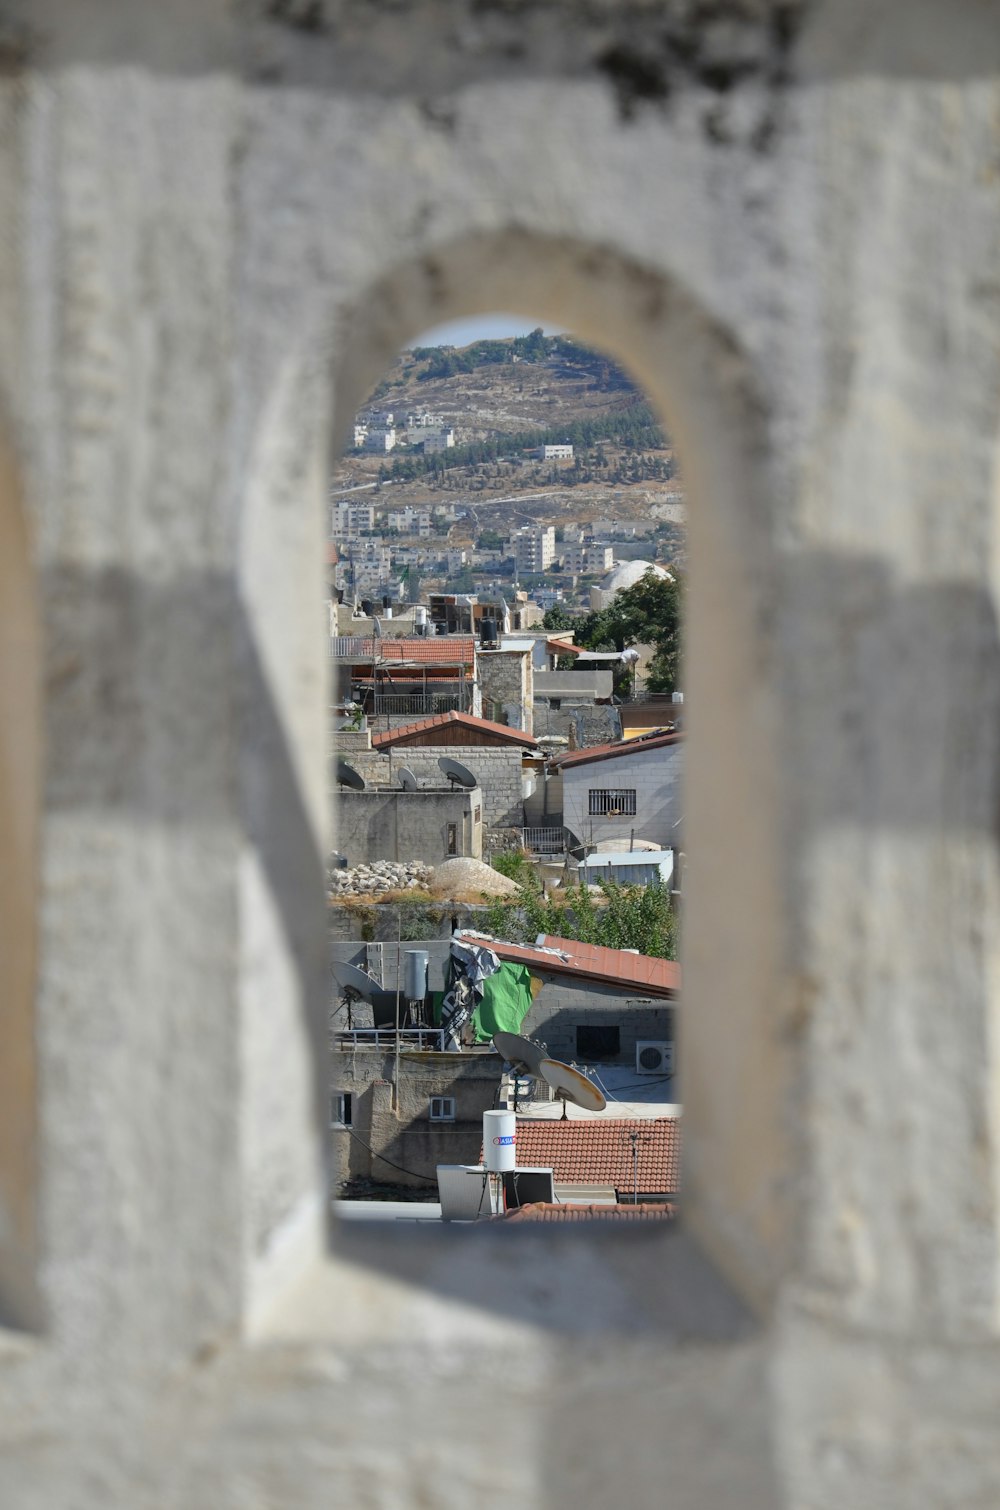 a view of a town through a stone archway